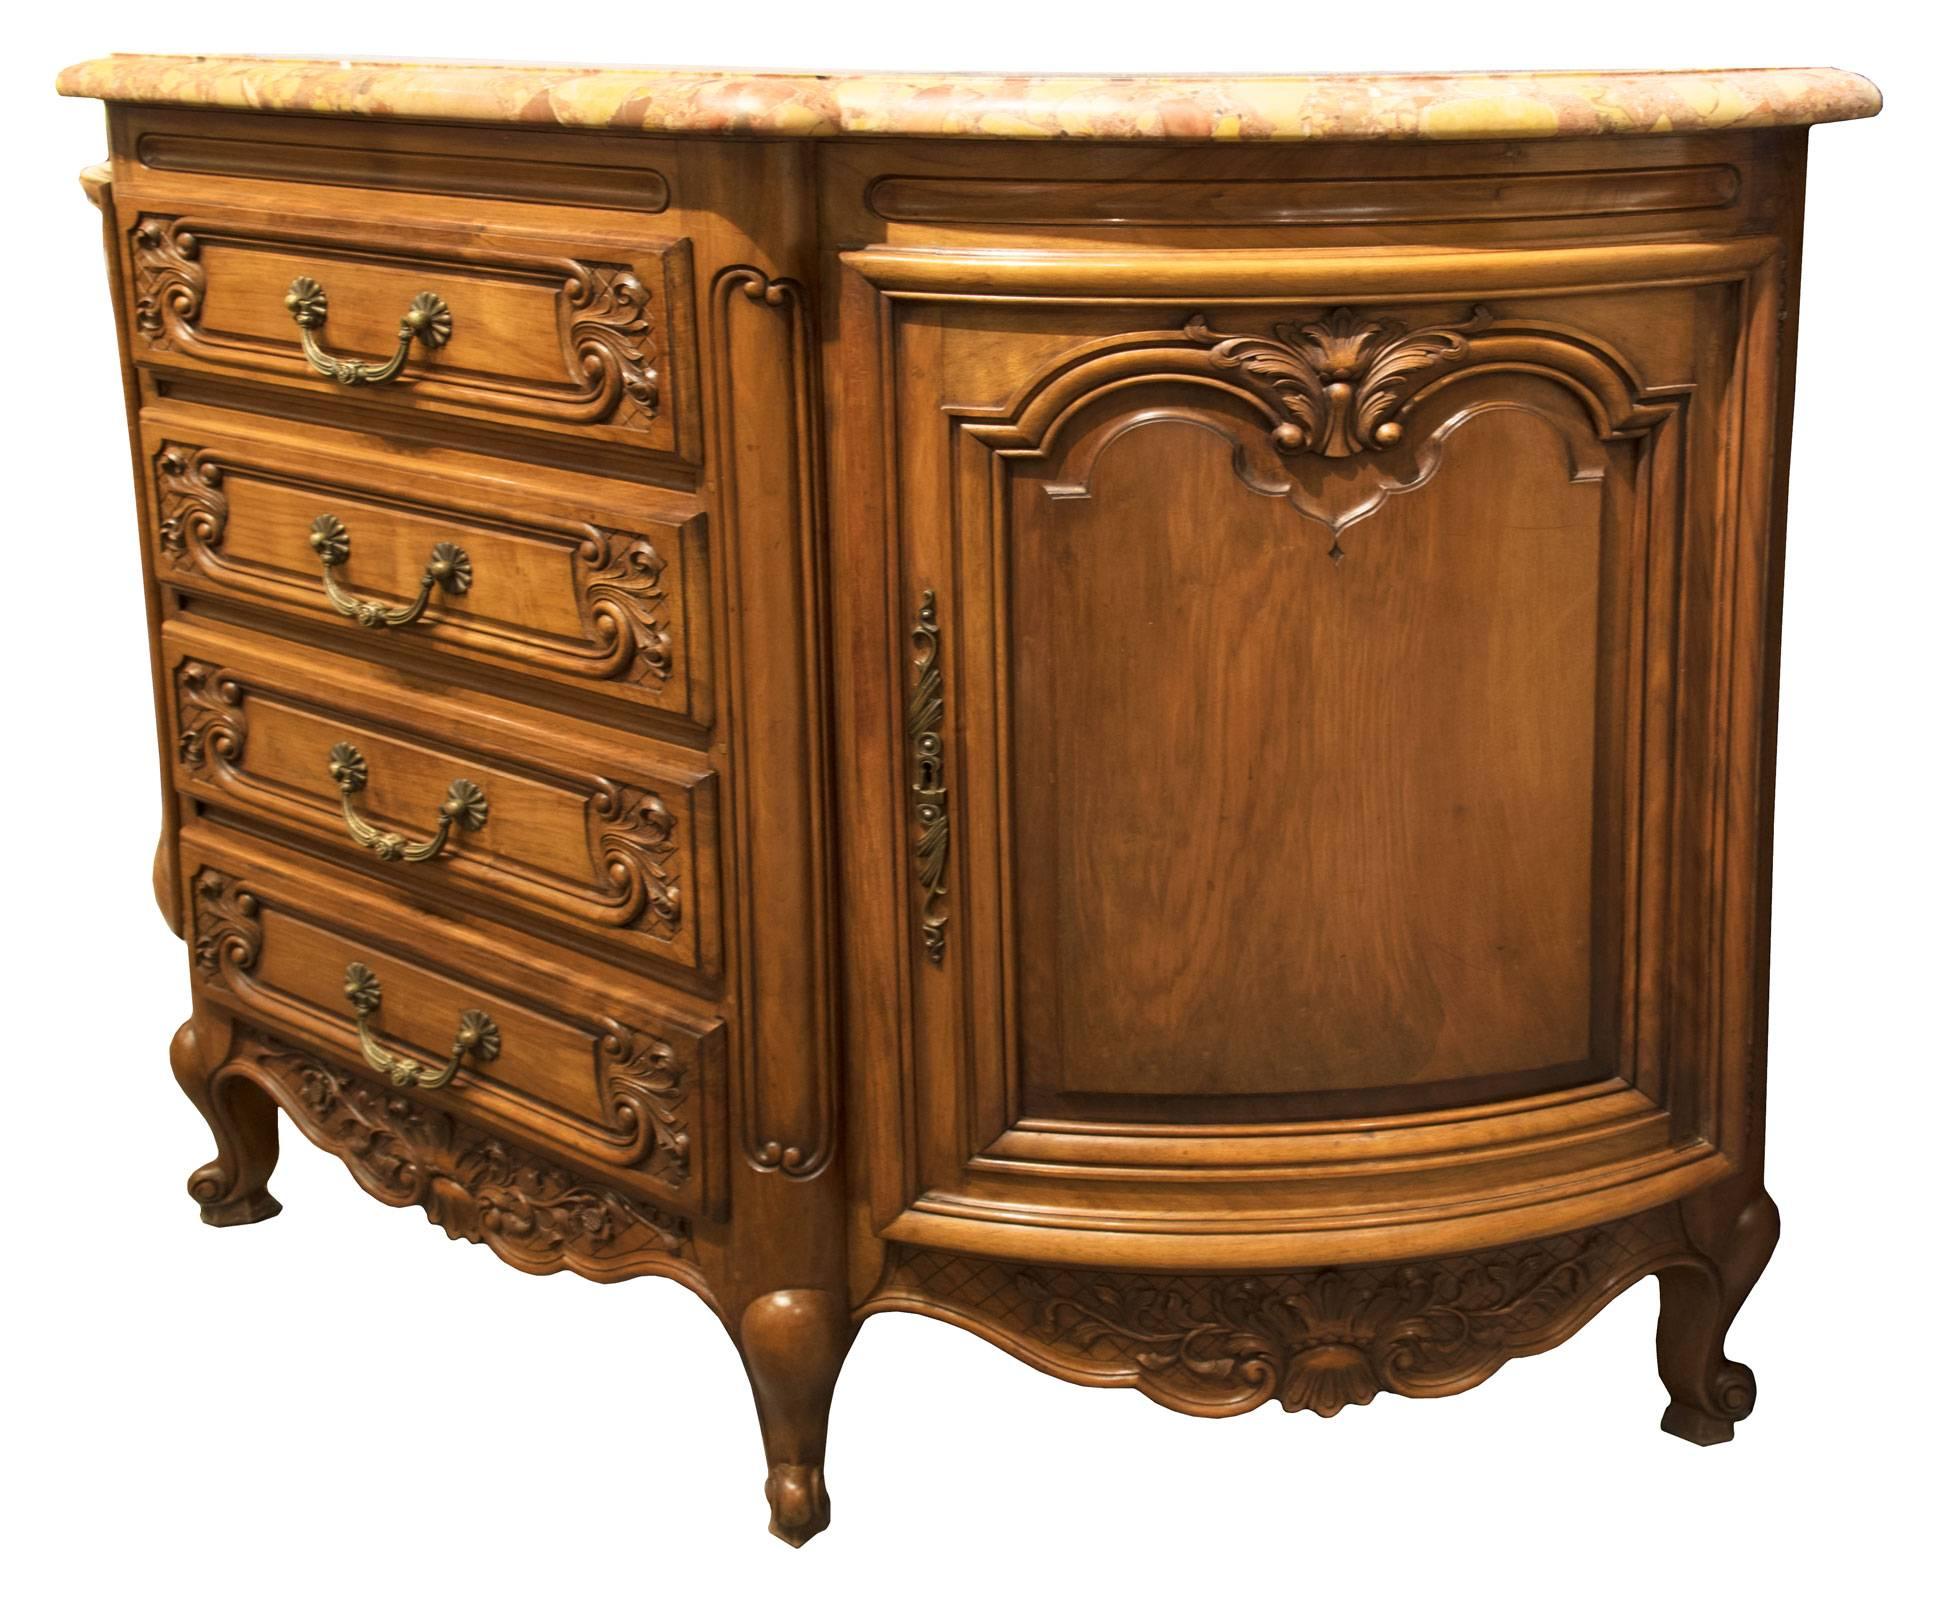 A handsome demilune chest of drawers with a yellow marble top with a molded edge, above a frieze with carved elliptical forms. Four stacked drawers with carved scroll and foliate fronts on a quilted ground and centred brass pulls are flanked on each